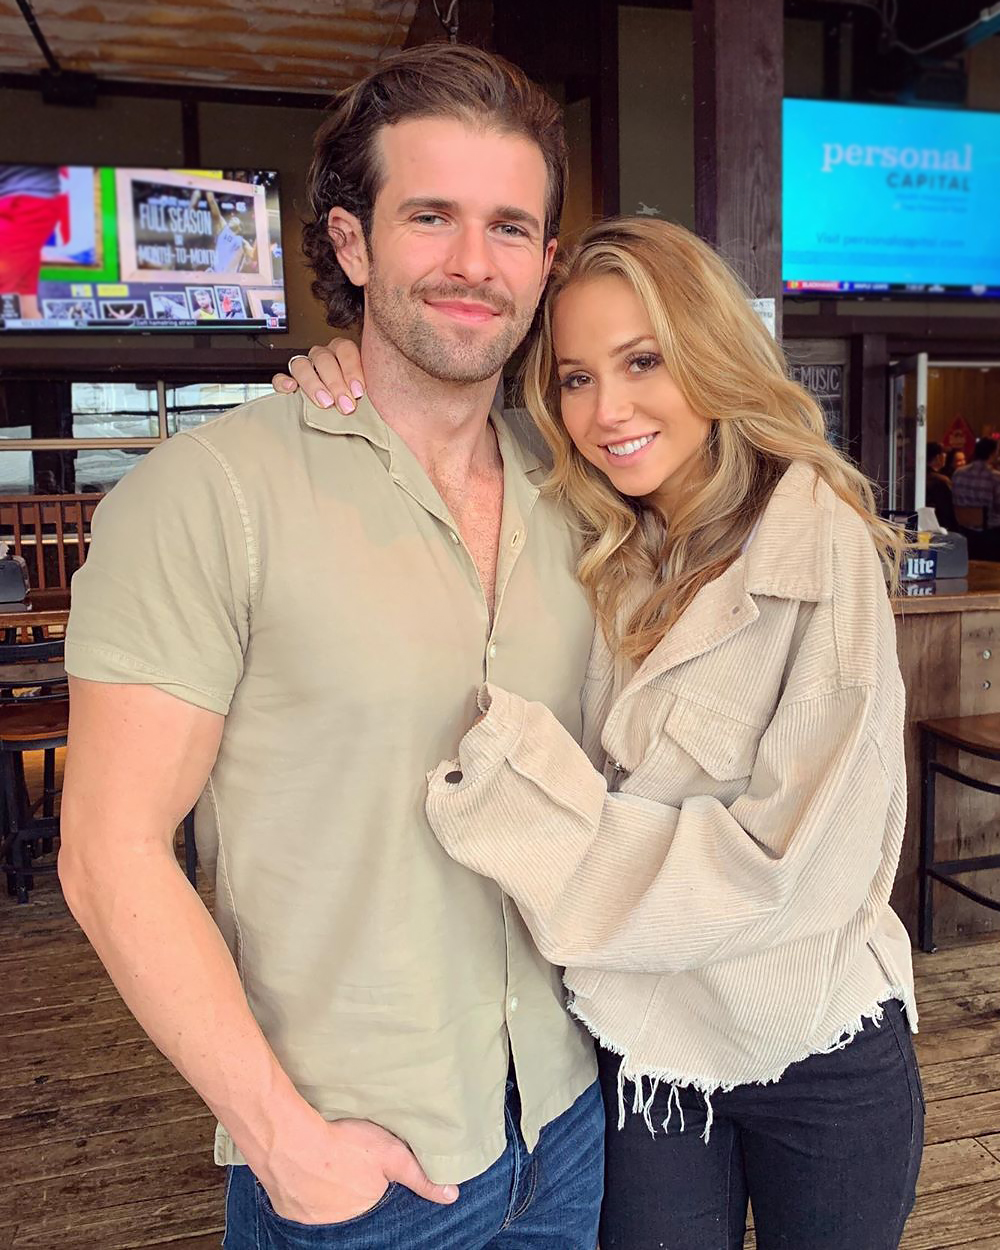 ‘Bachelorette’ Alum Jed Wyatt Explains How the Quarantine Has Been a ‘Good Test’ for His Relationship